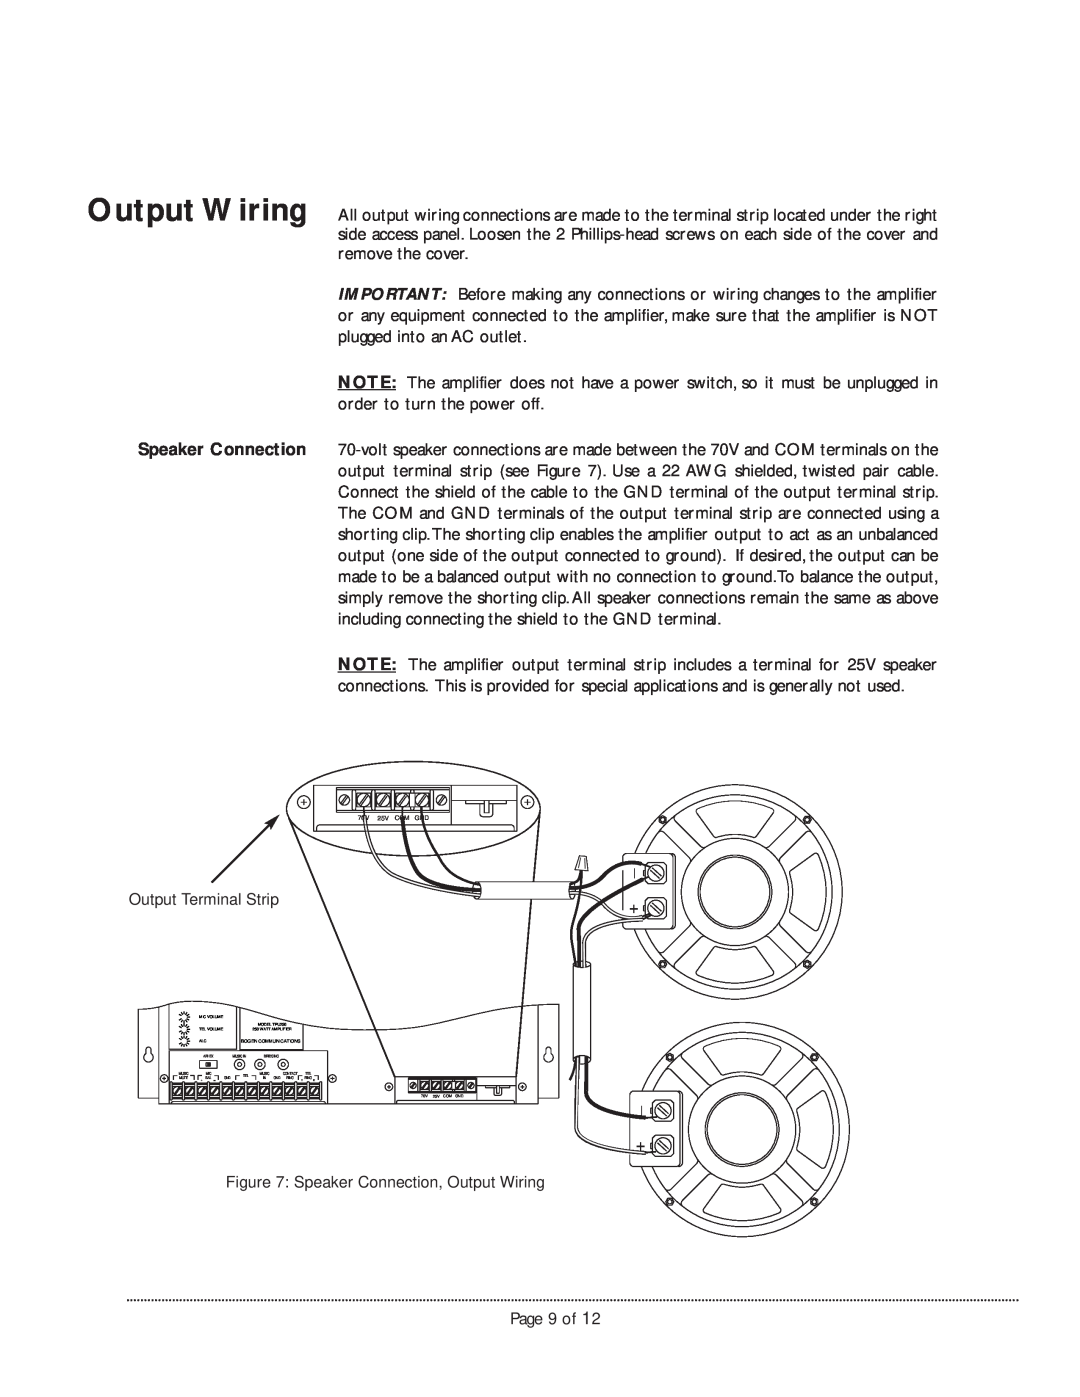 Bogen TPU250 manual Page 9 of 